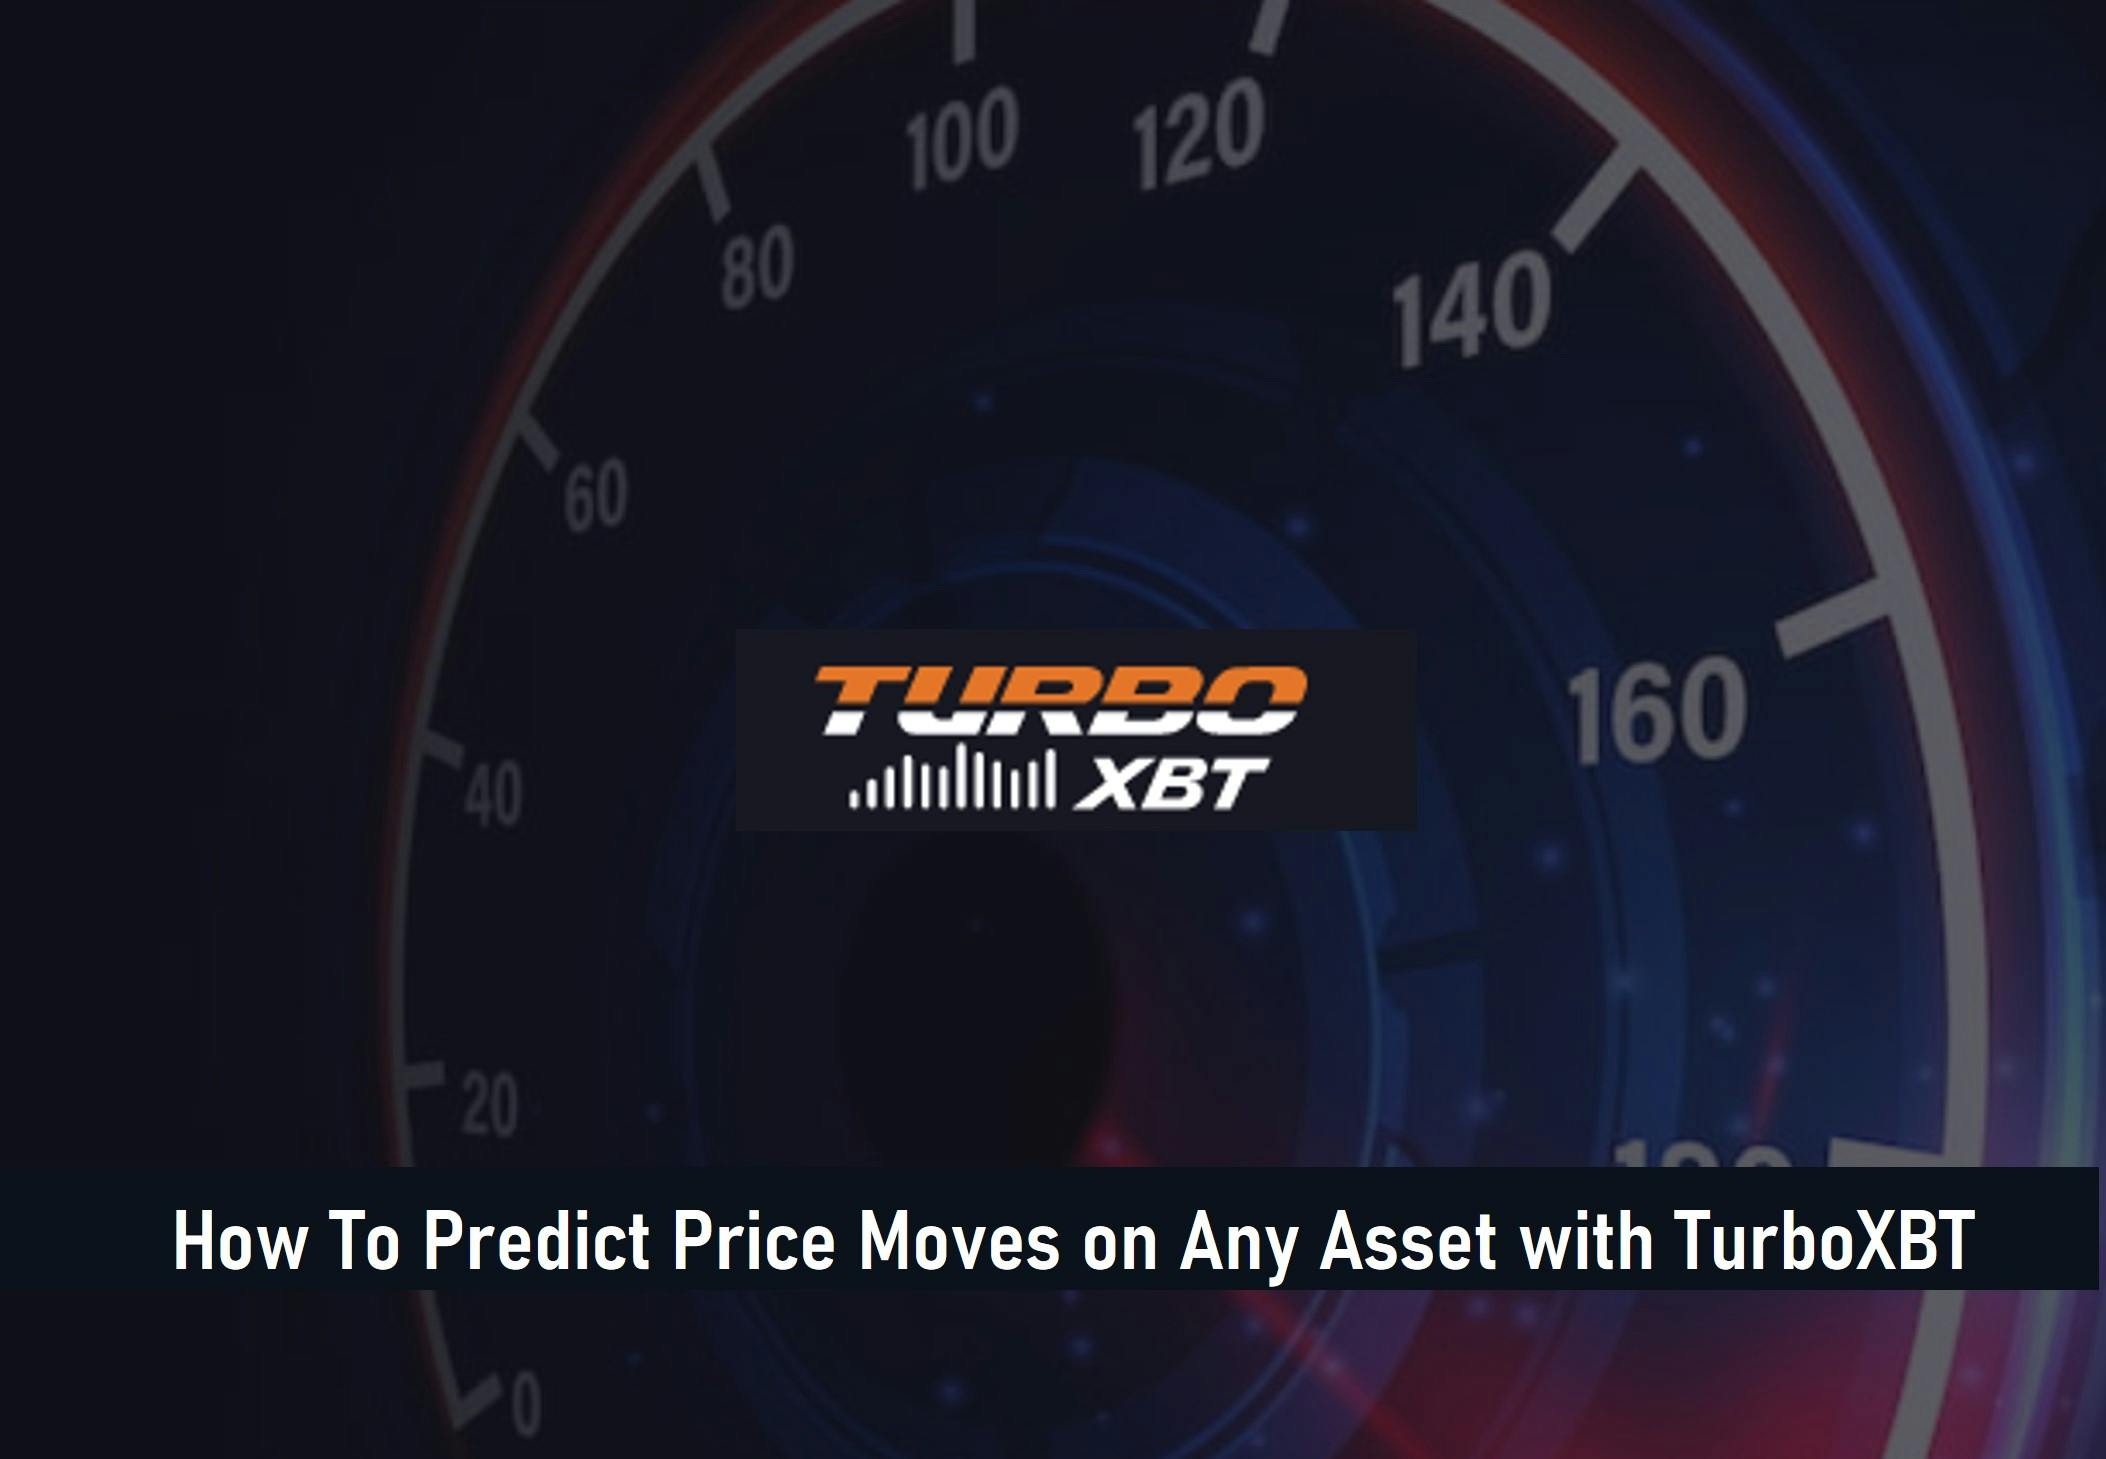 How To Predict Price Moves on Any Asset with Turbo XBT